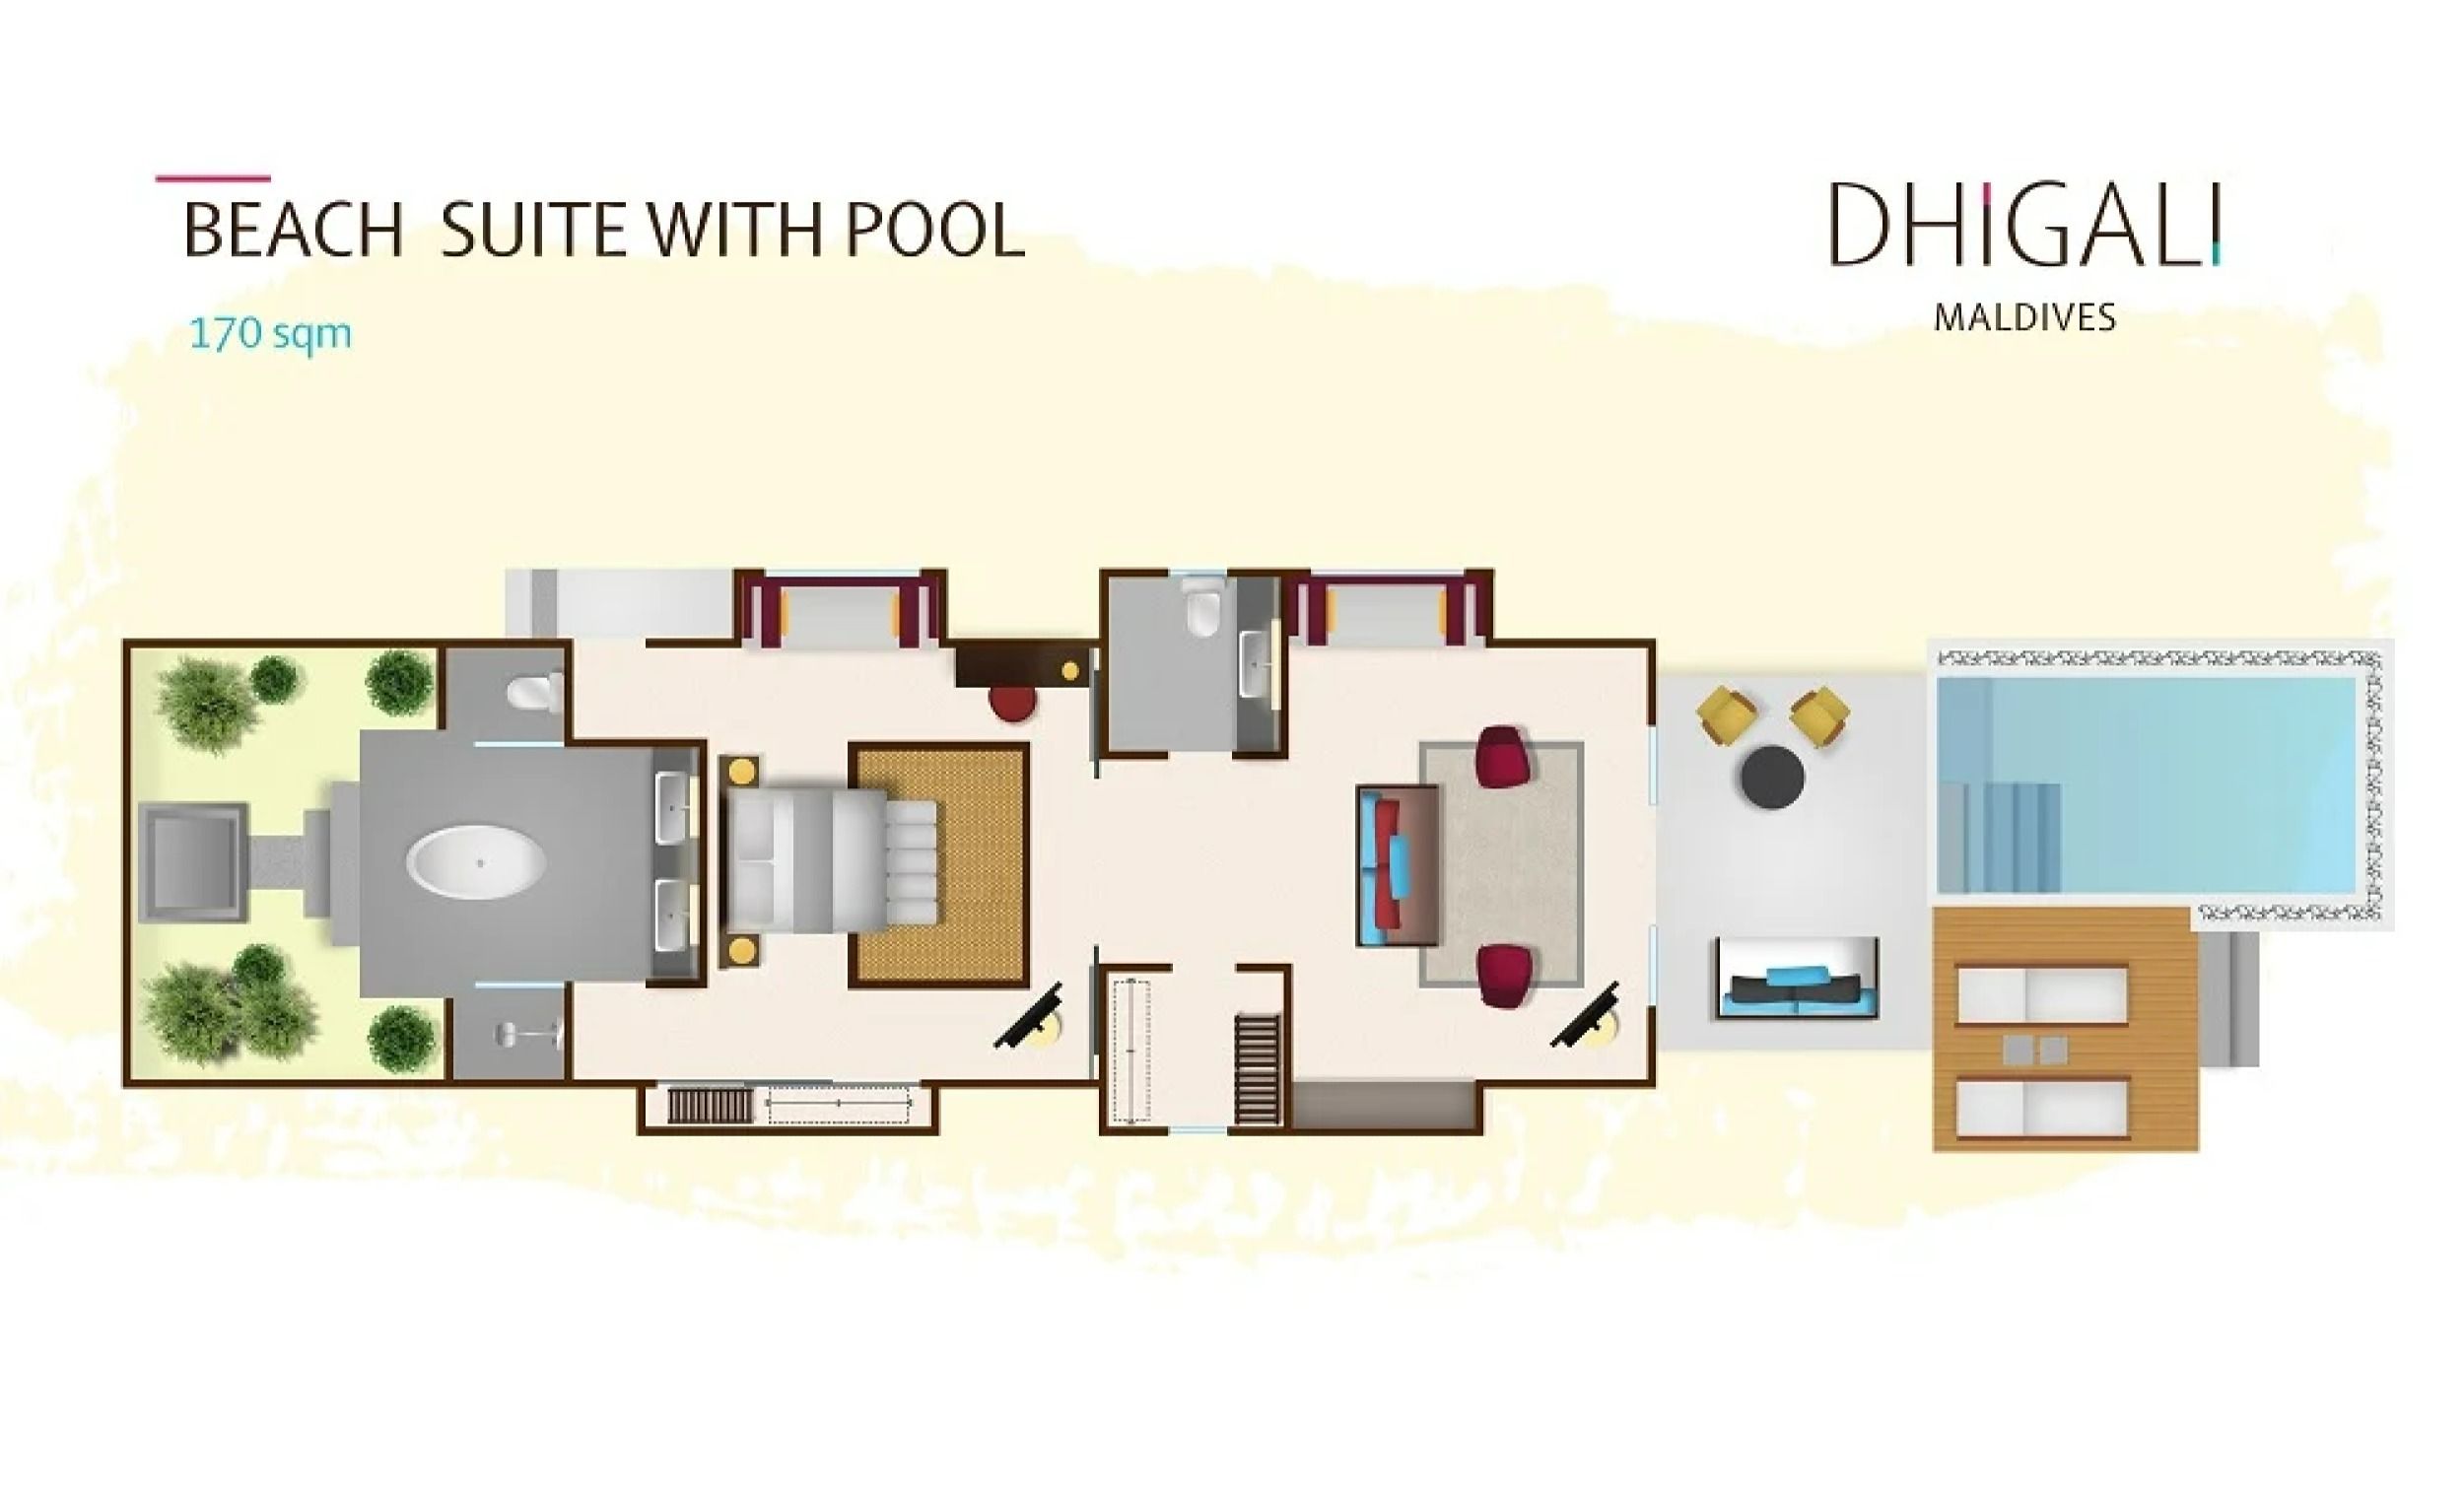 Beach Suite with Pool - Floor Plan - Dhigali Maldives